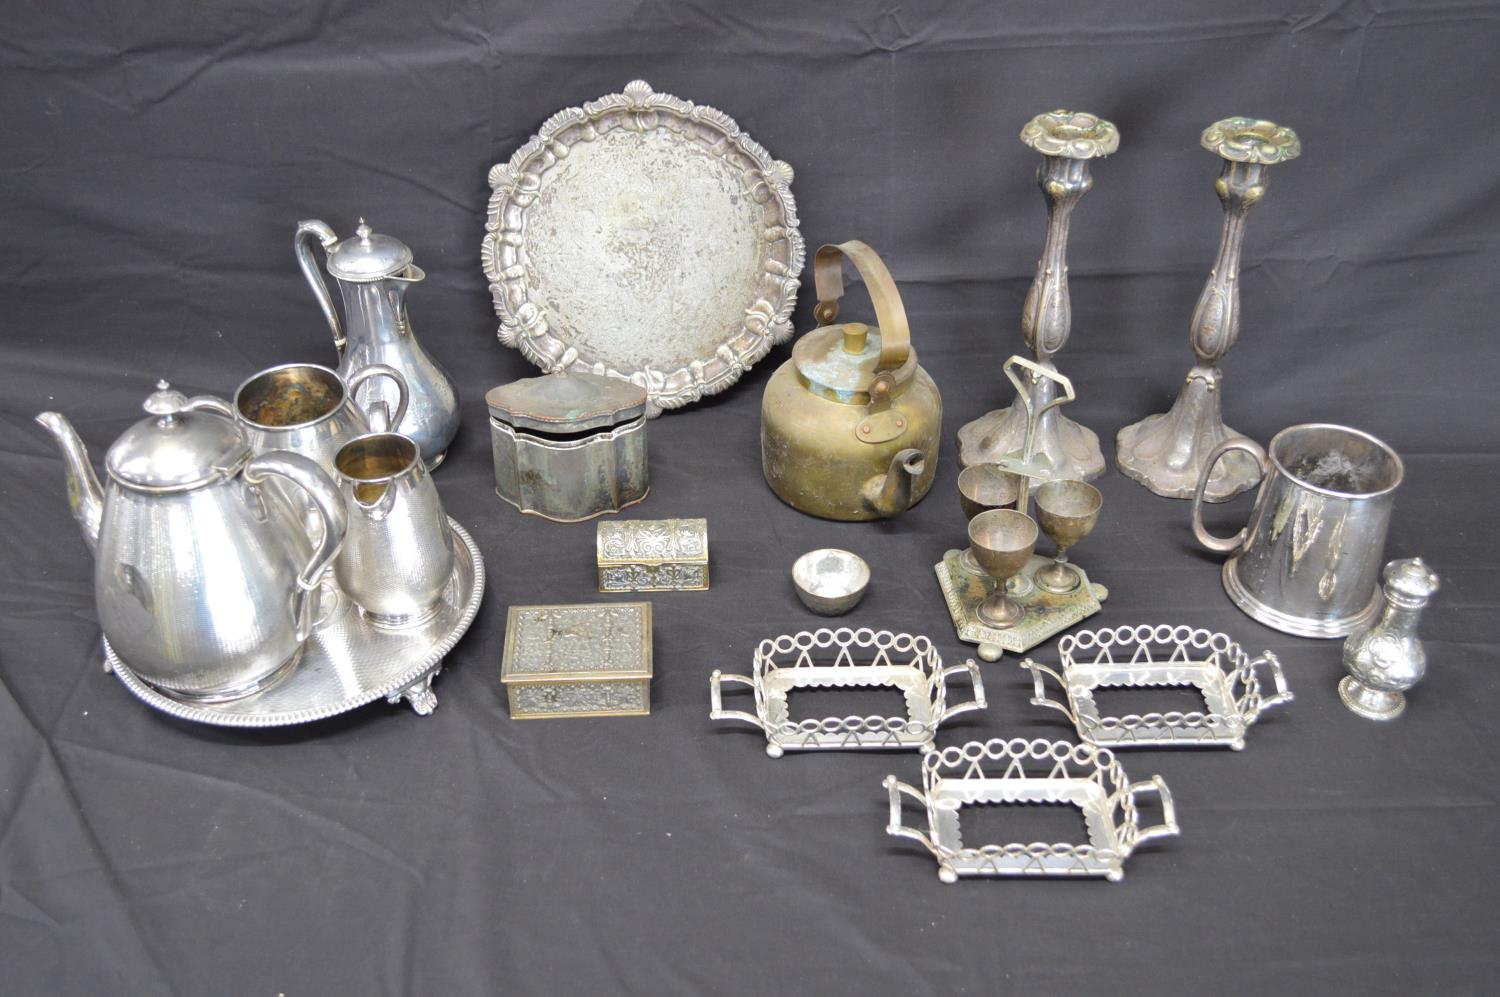 Collection of silverplate and metalware to include: four piece teaset, salver, pair of candlesticks, - Image 2 of 2